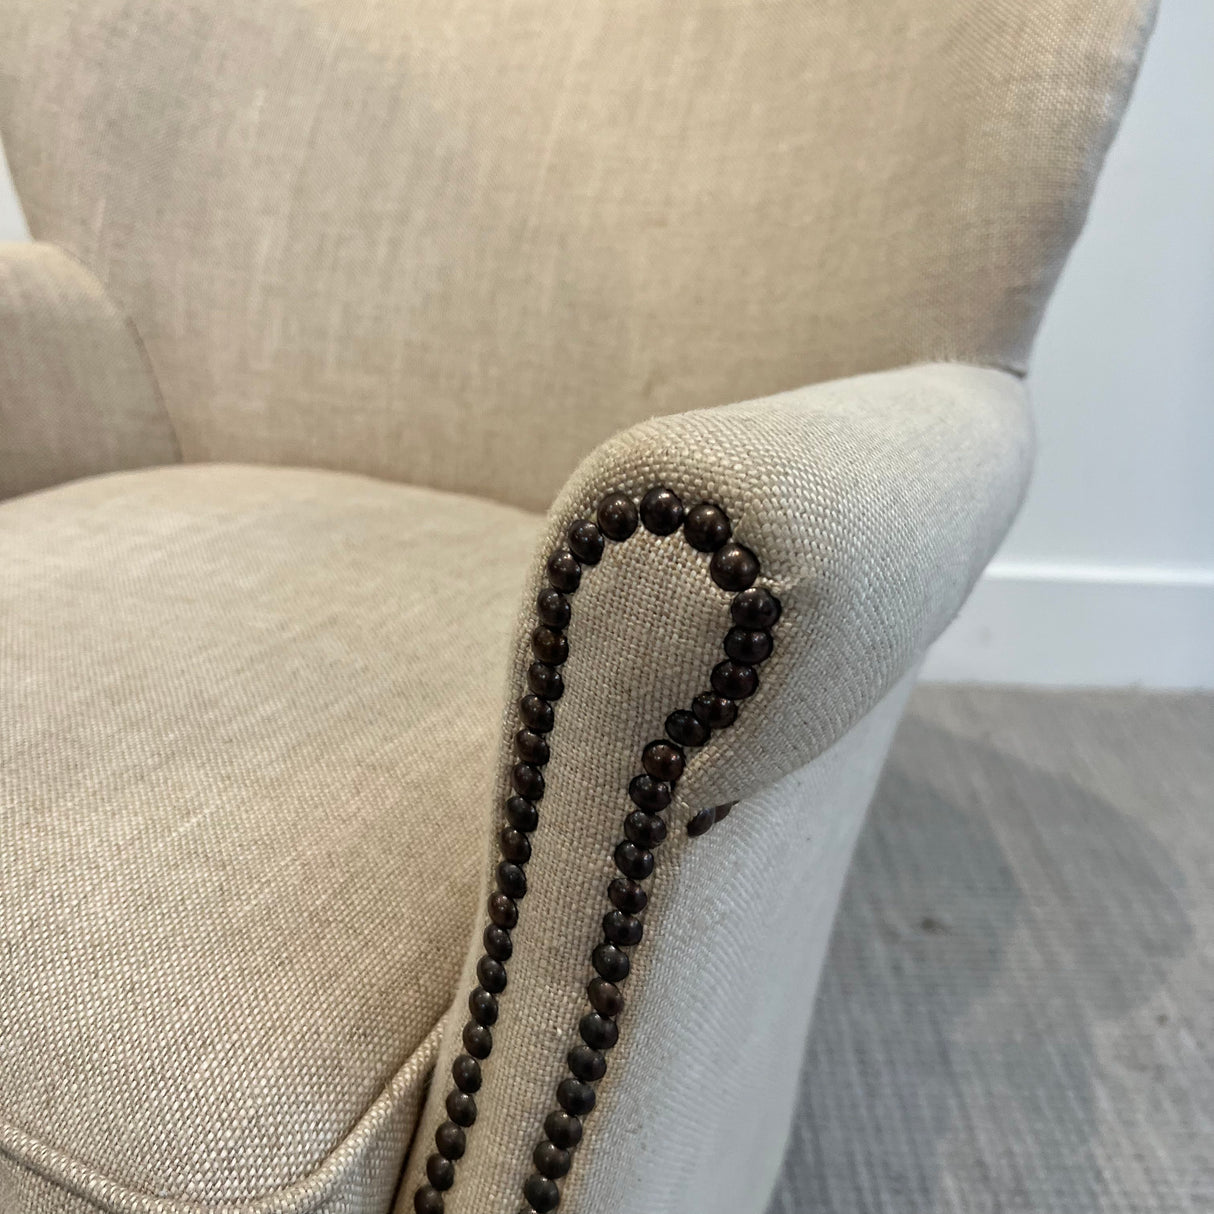 Restoration Hardware Professors Chair with Nailheads